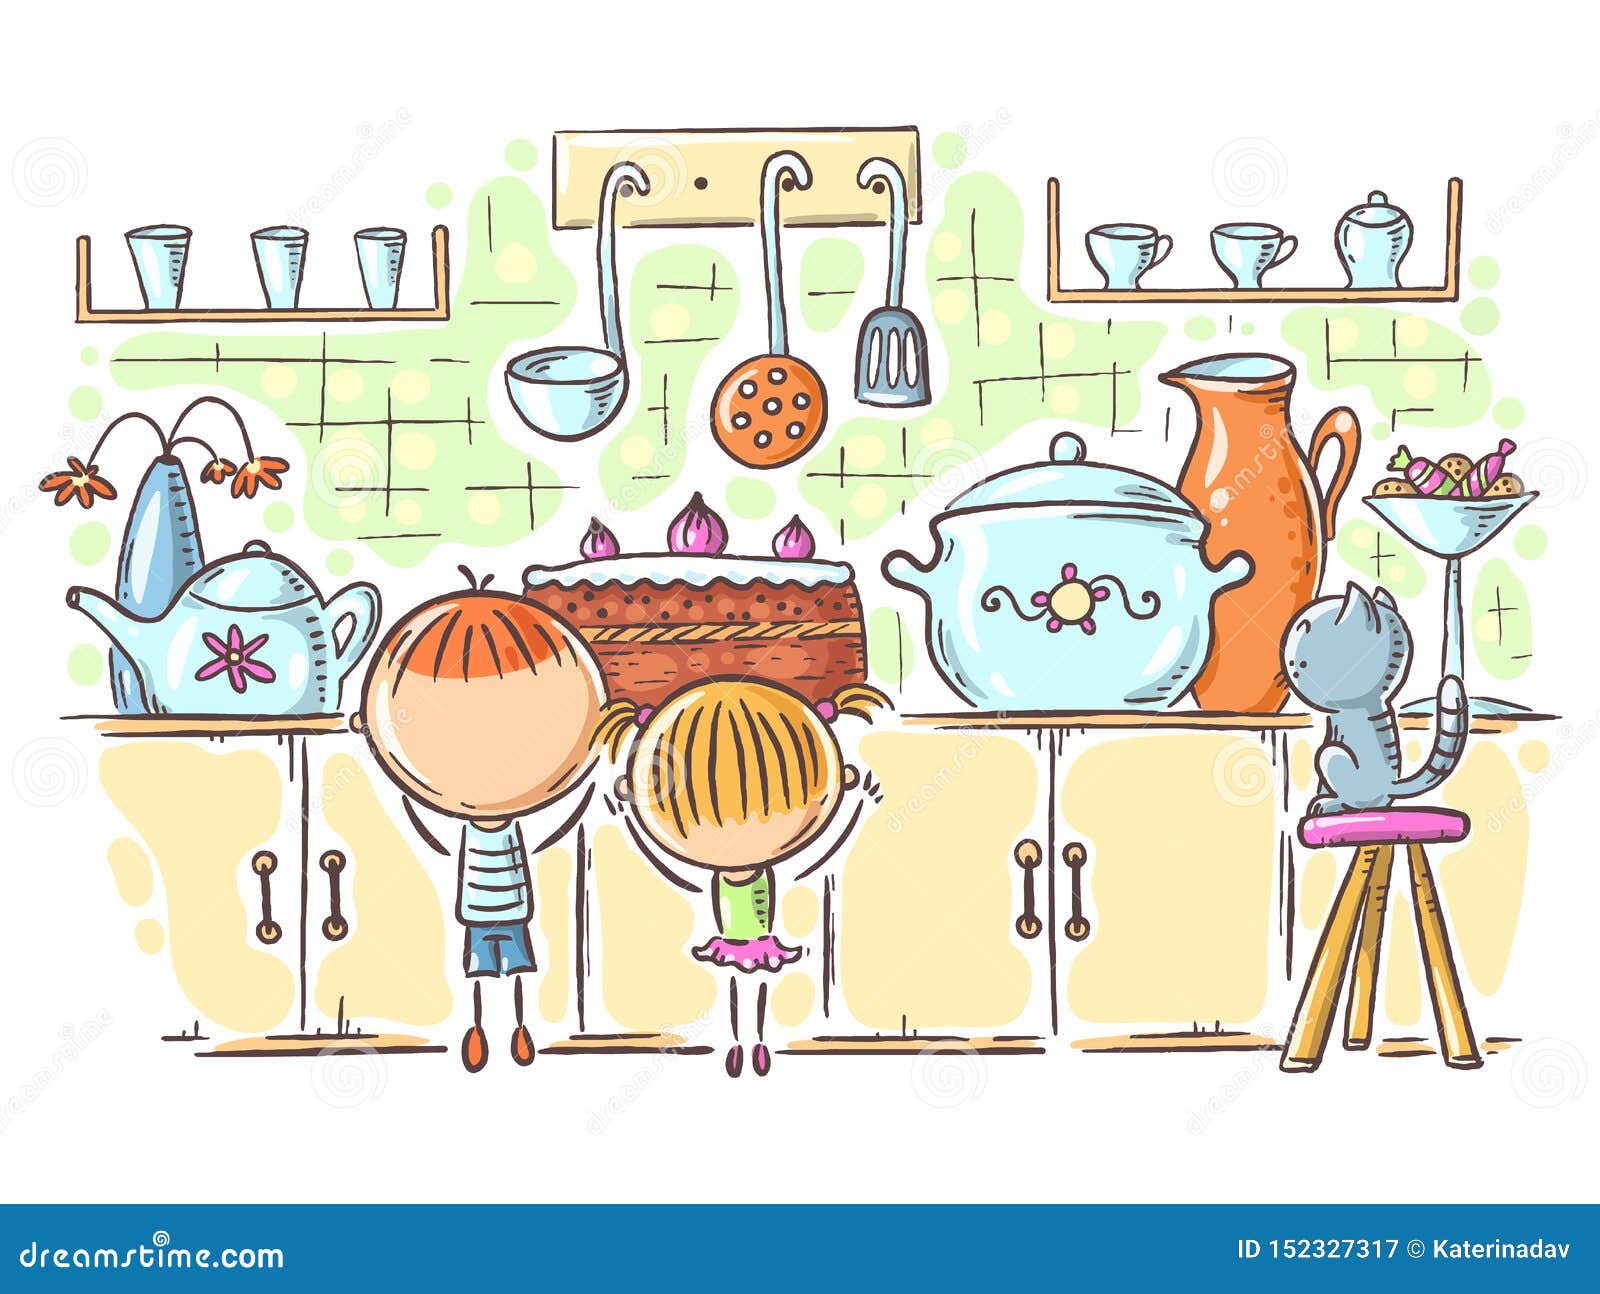 Set children kitchen and cooking drawings Vector Image